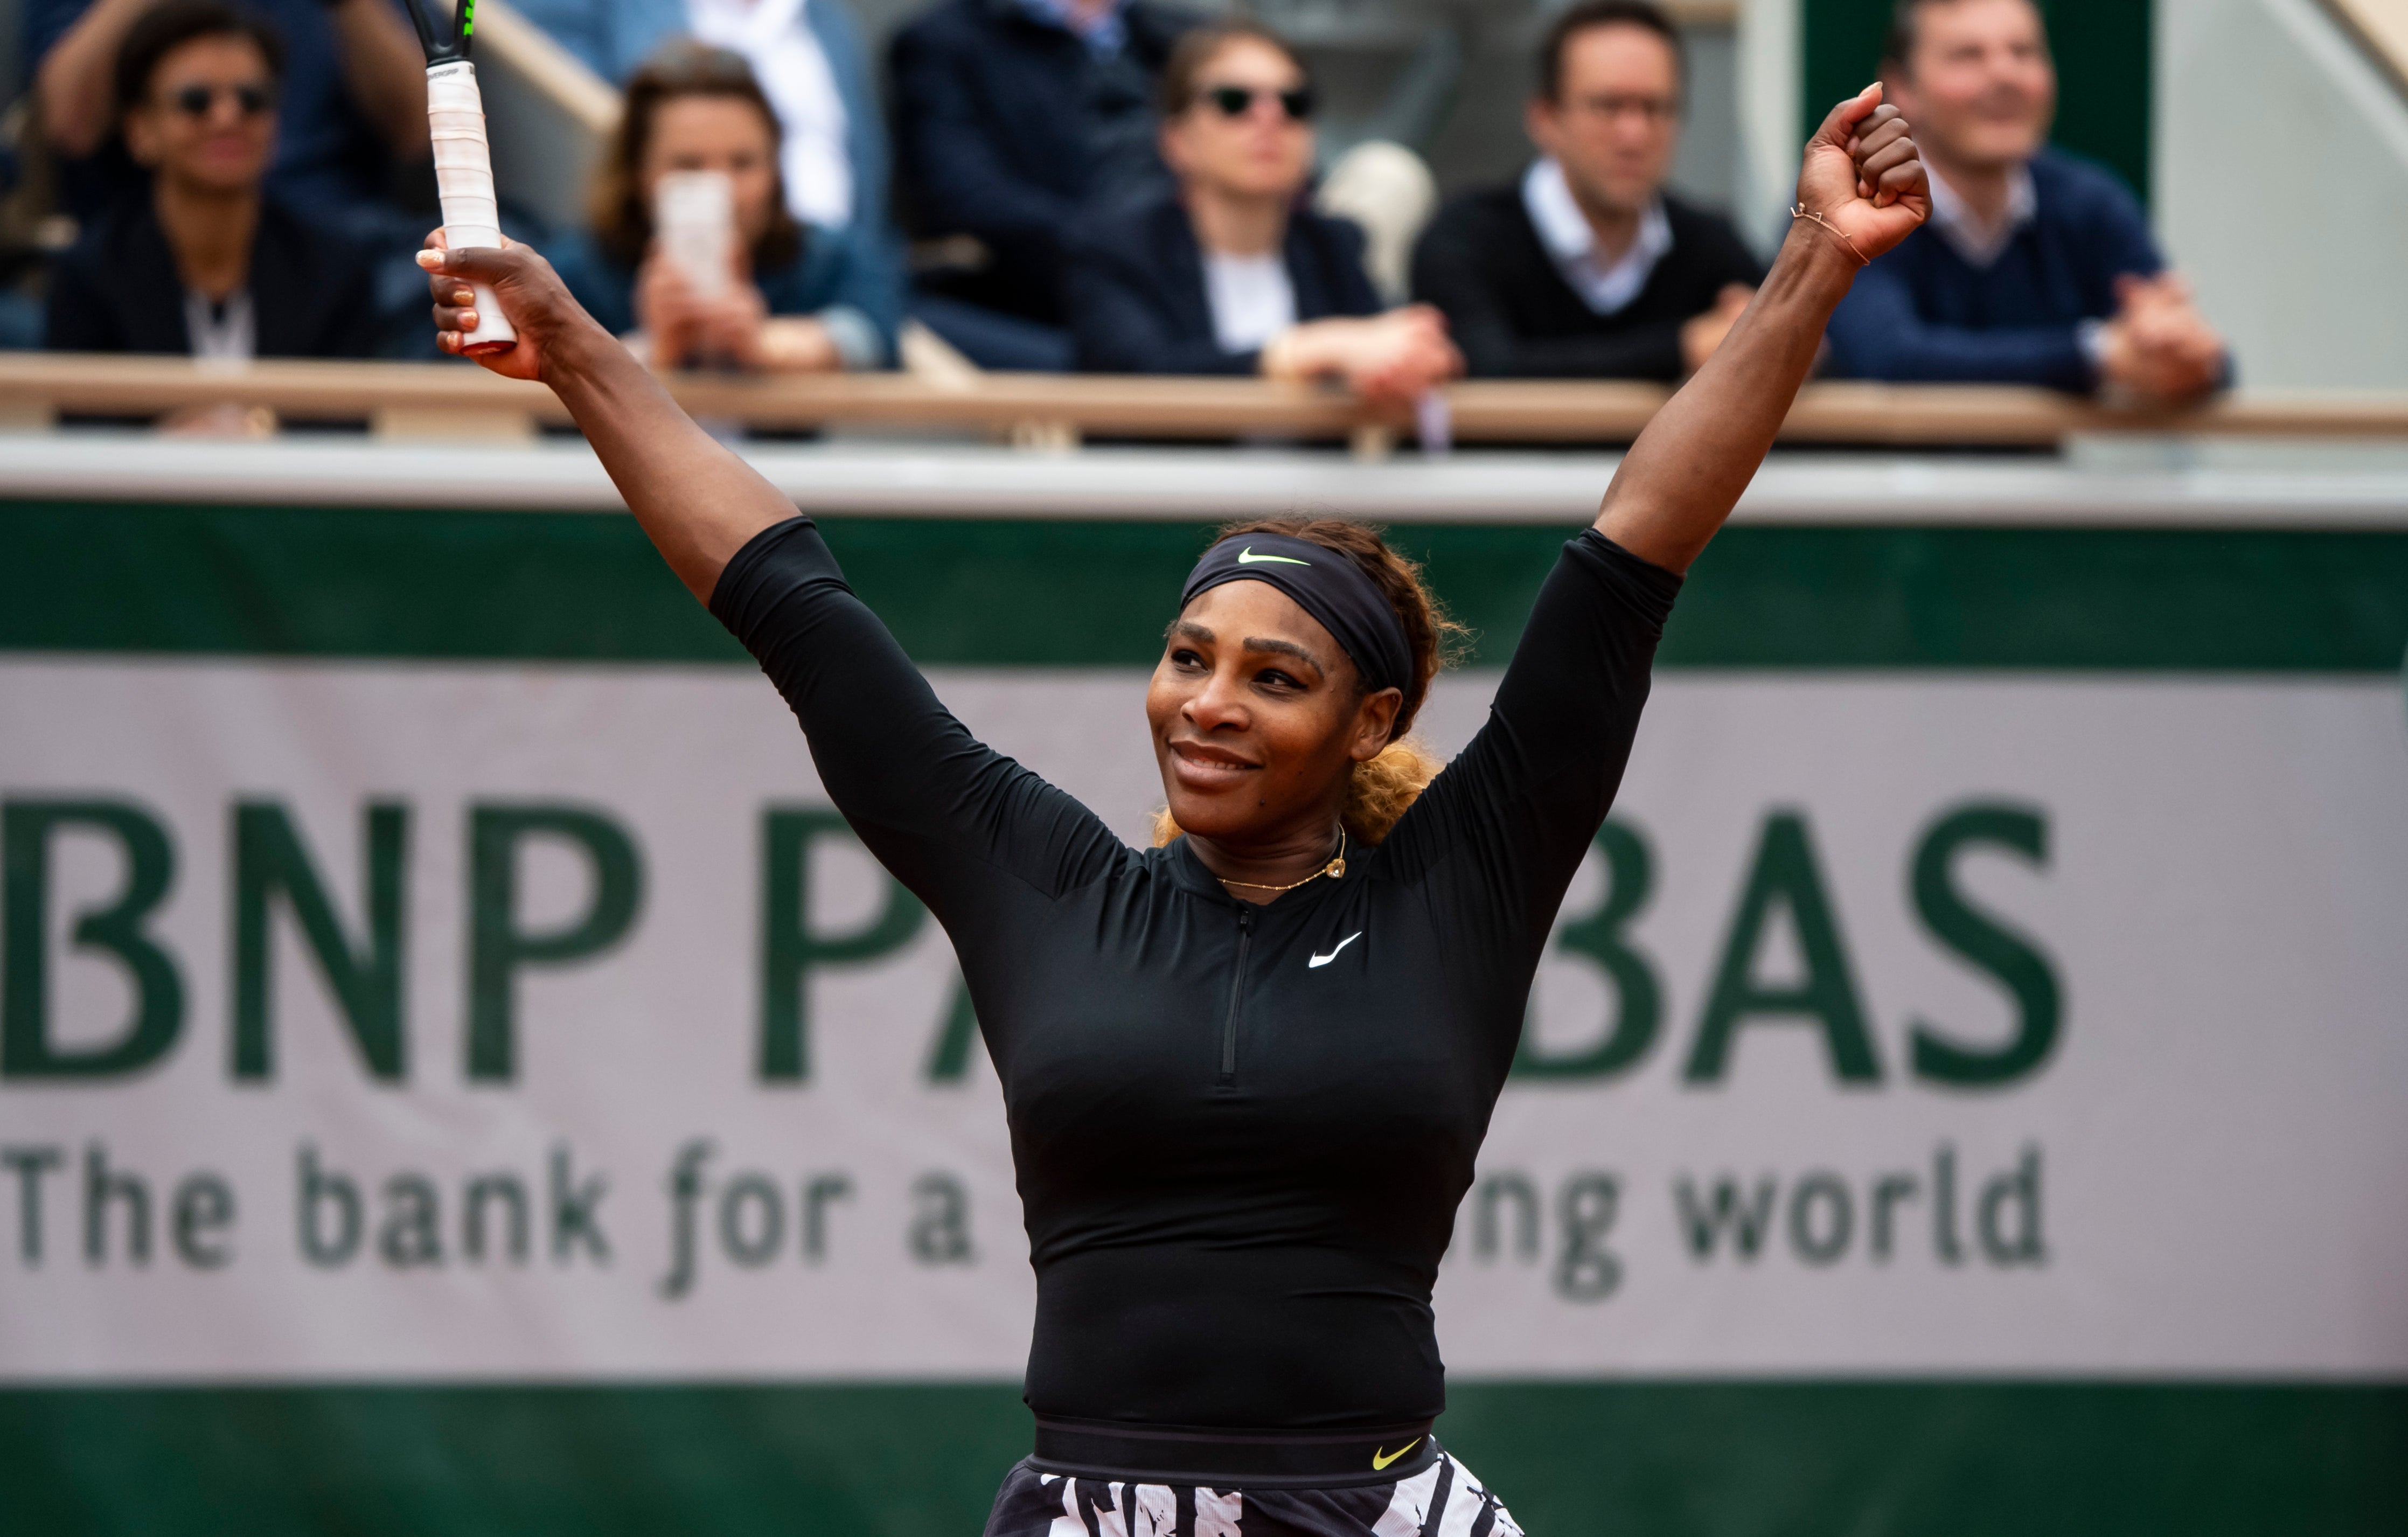 Serena Williams Is Making History As The First Athlete On Forbes' Self-Made List